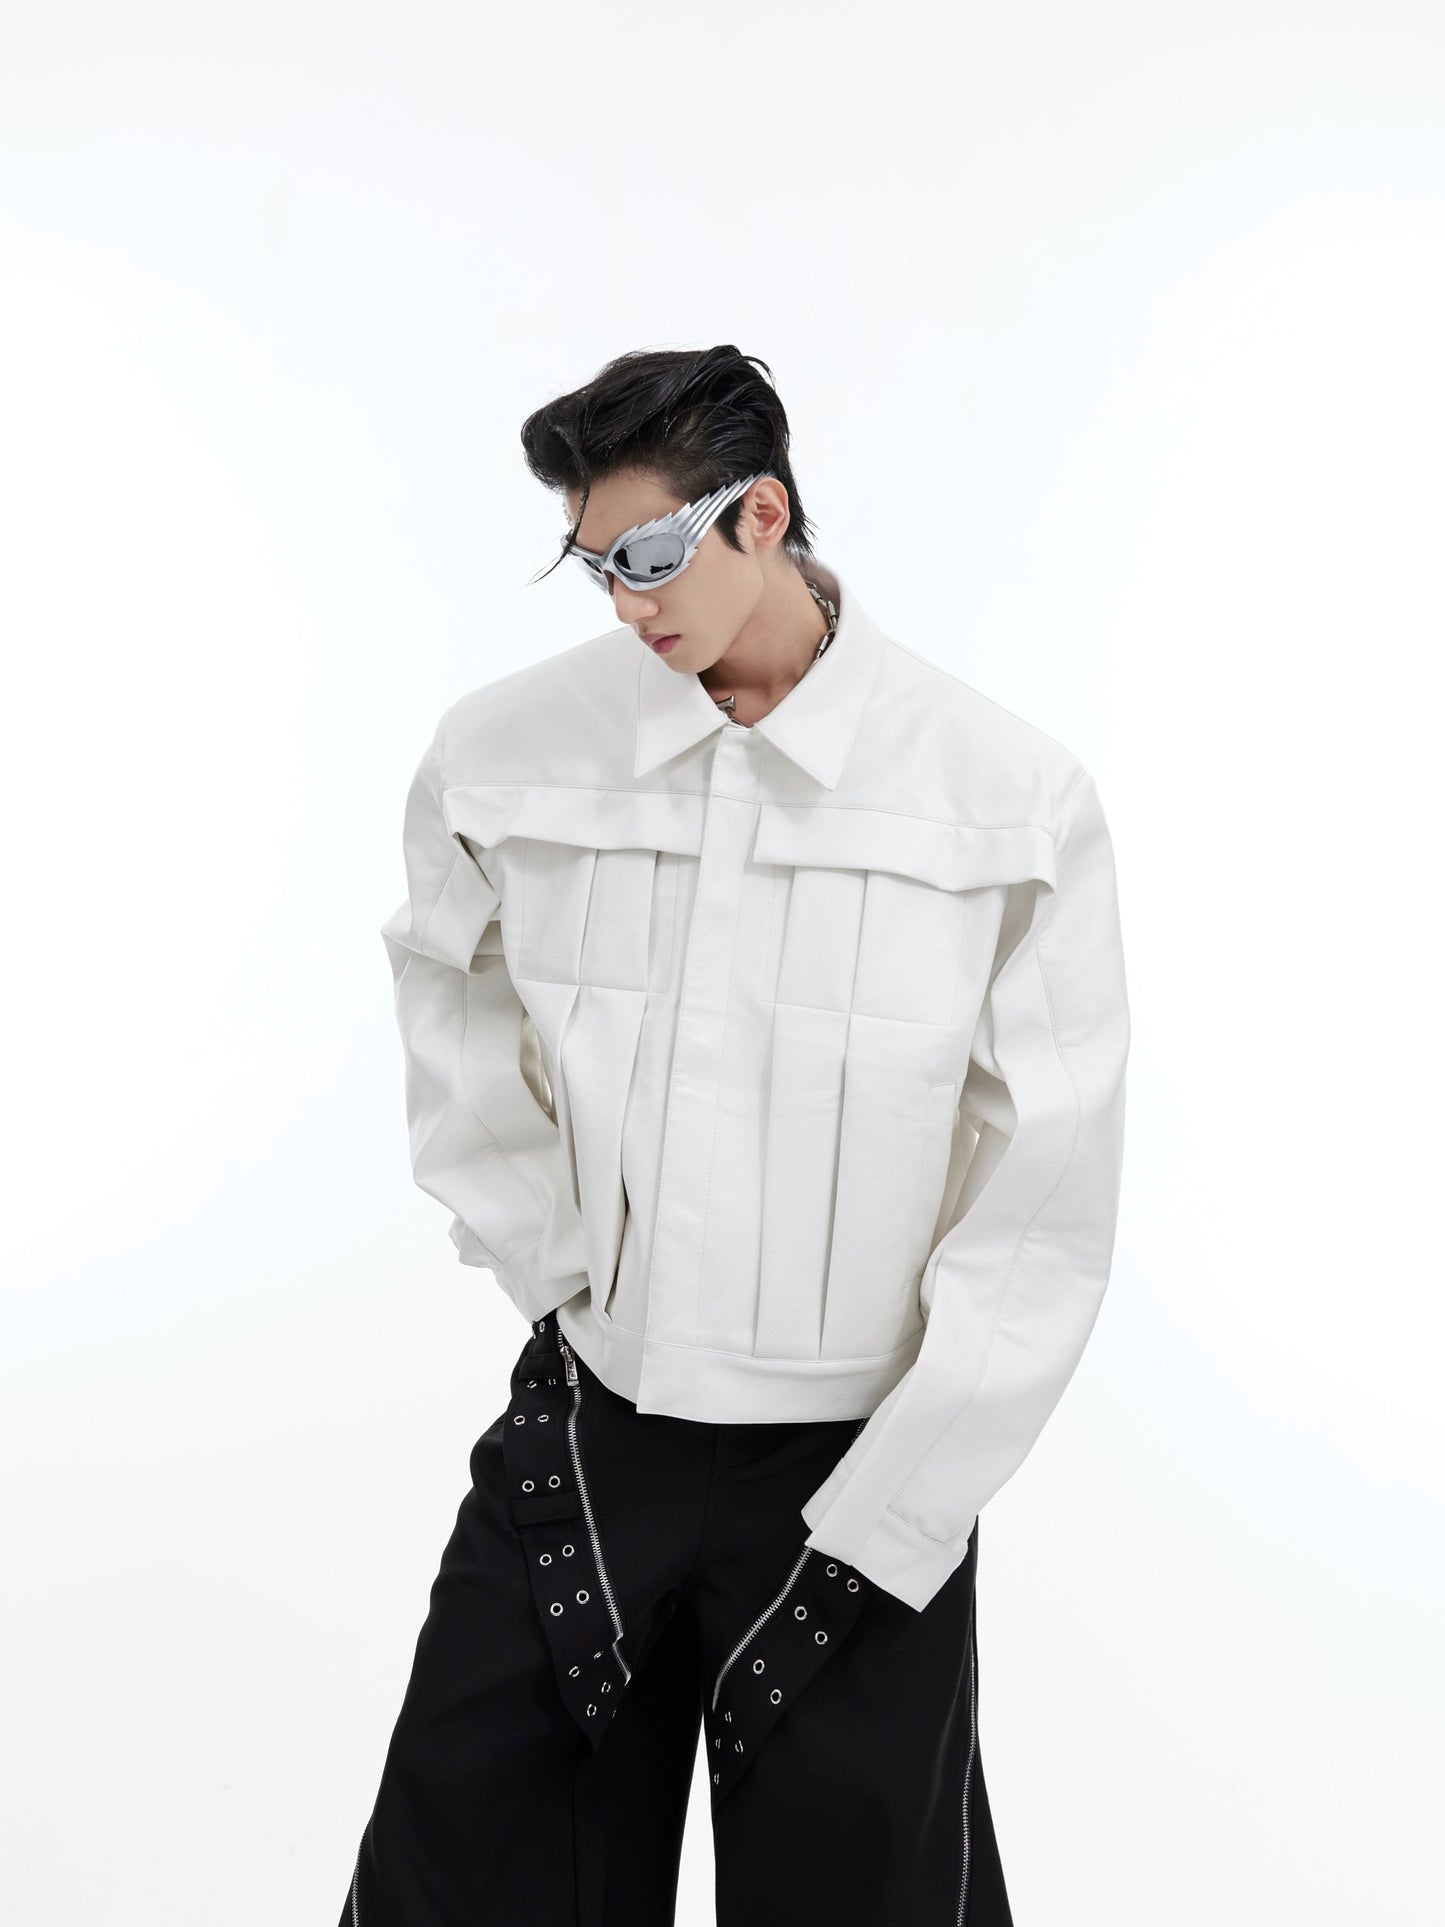 Cultur E24ss's new three-dimensional deconstructed padded shoulder jacket jacket with a sense of high design and a niche short PU leather jacket